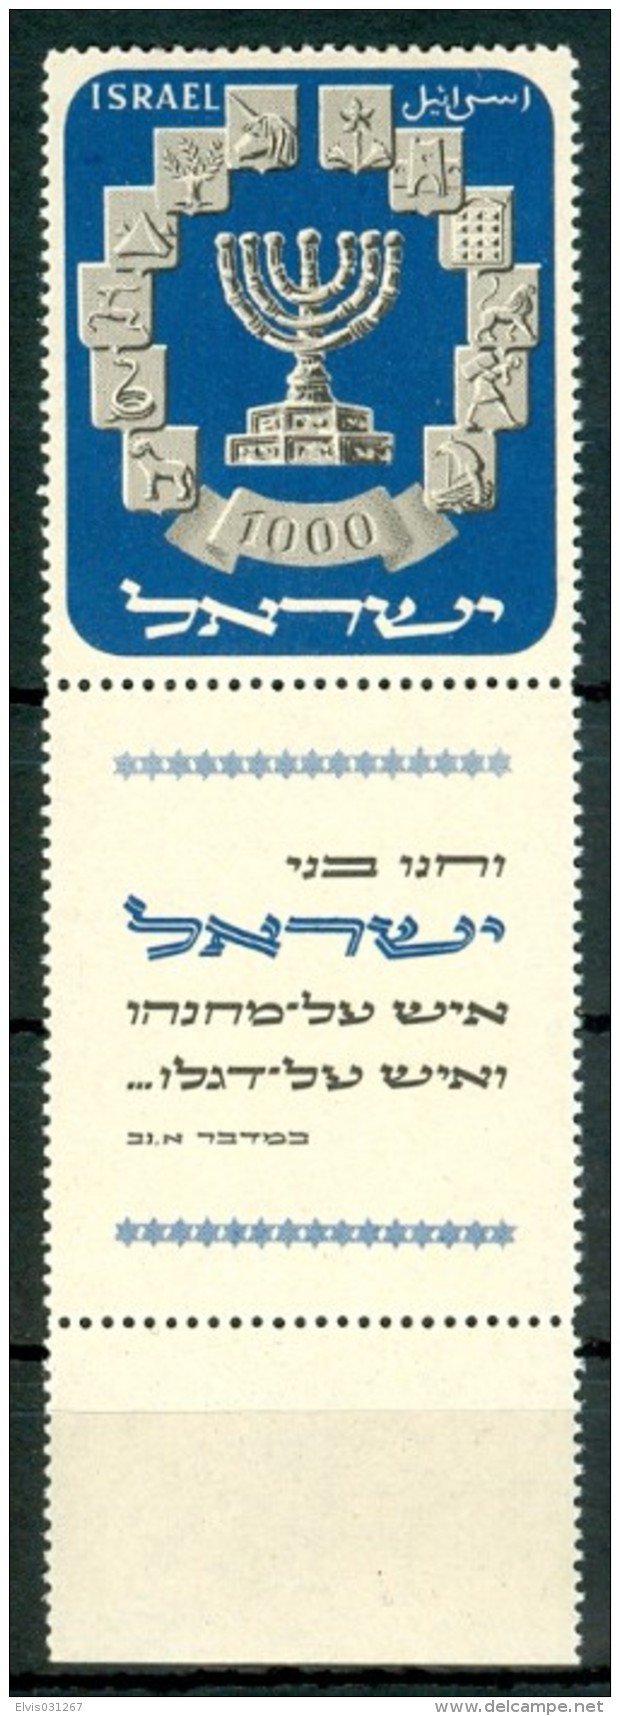 Israel - 1952, Michel/Philex No. : 66, - MNH - ***  - Full Tab - - Unused Stamps (with Tabs)